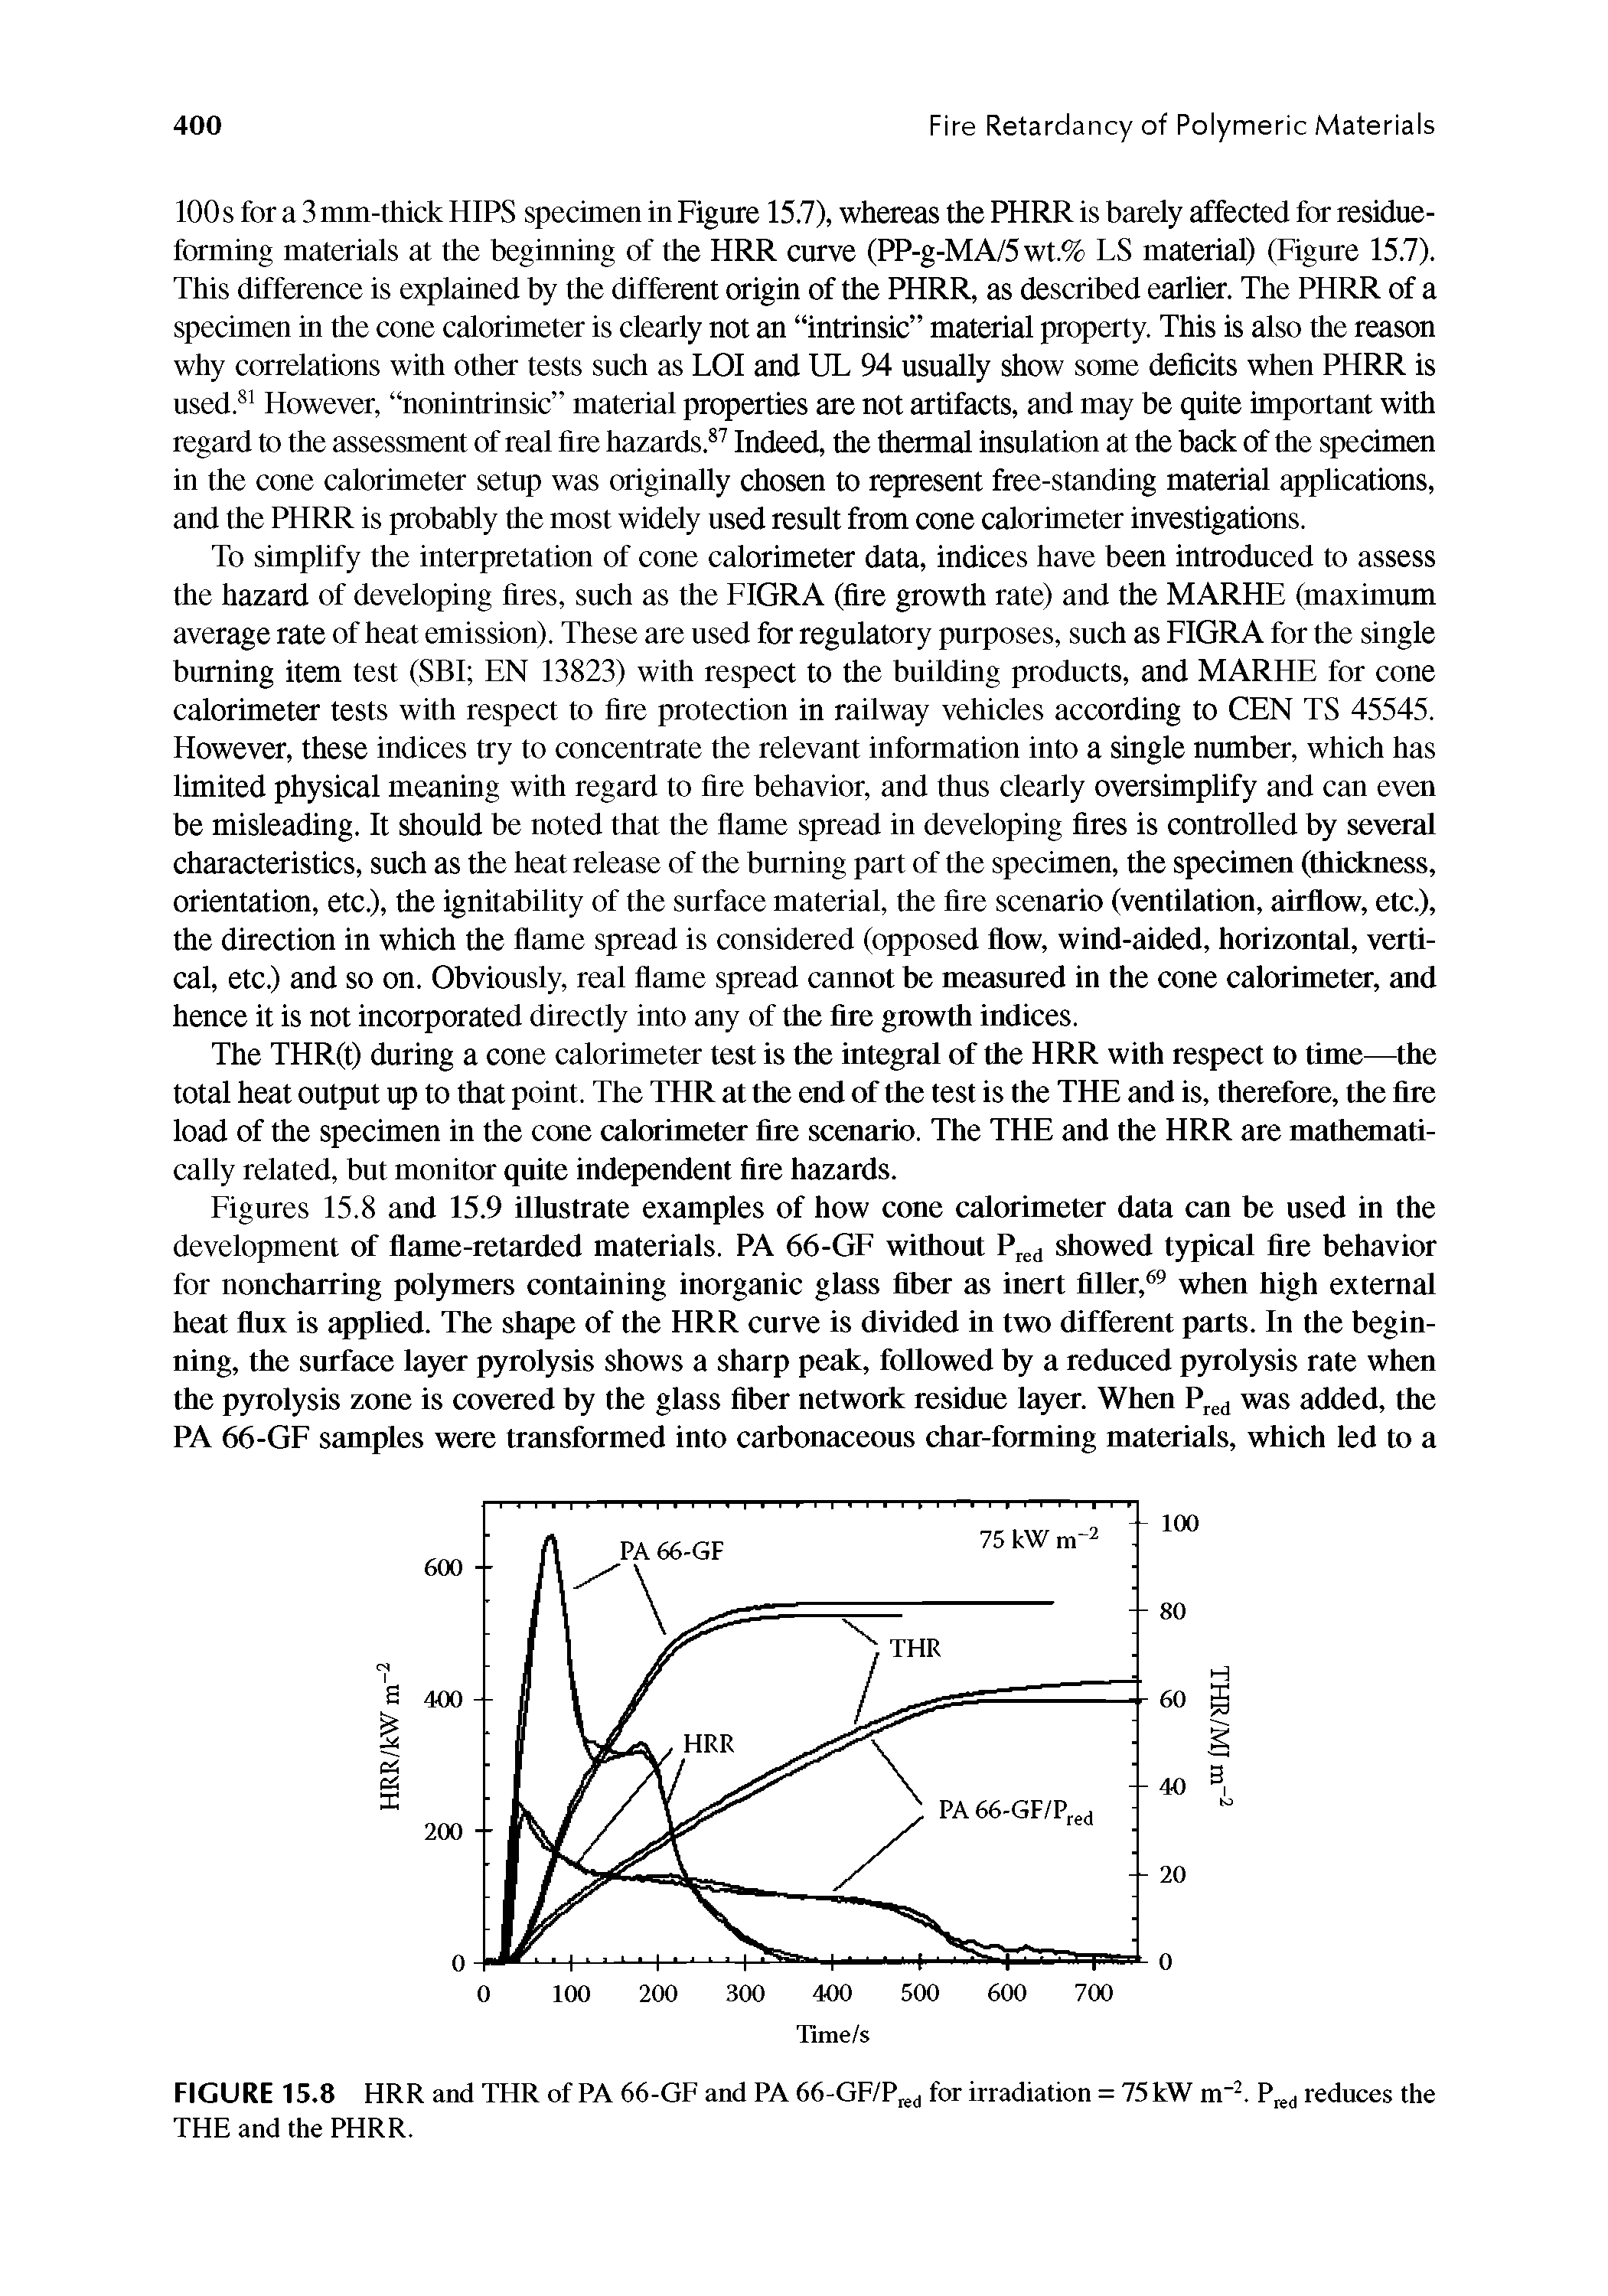 Figures 15.8 and 15.9 illustrate examples of how cone calorimeter data can be used in the development of flame-retarded materials. PA 66-GF without Pred showed typical fire behavior for noncharring polymers containing inorganic glass fiber as inert filler,69 when high external heat flux is applied. The shape of the HRR curve is divided in two different parts. In the beginning, the surface layer pyrolysis shows a sharp peak, followed by a reduced pyrolysis rate when the pyrolysis zone is covered by the glass fiber network residue layer. When Pred was added, the PA 66-GF samples were transformed into carbonaceous char-forming materials, which led to a...